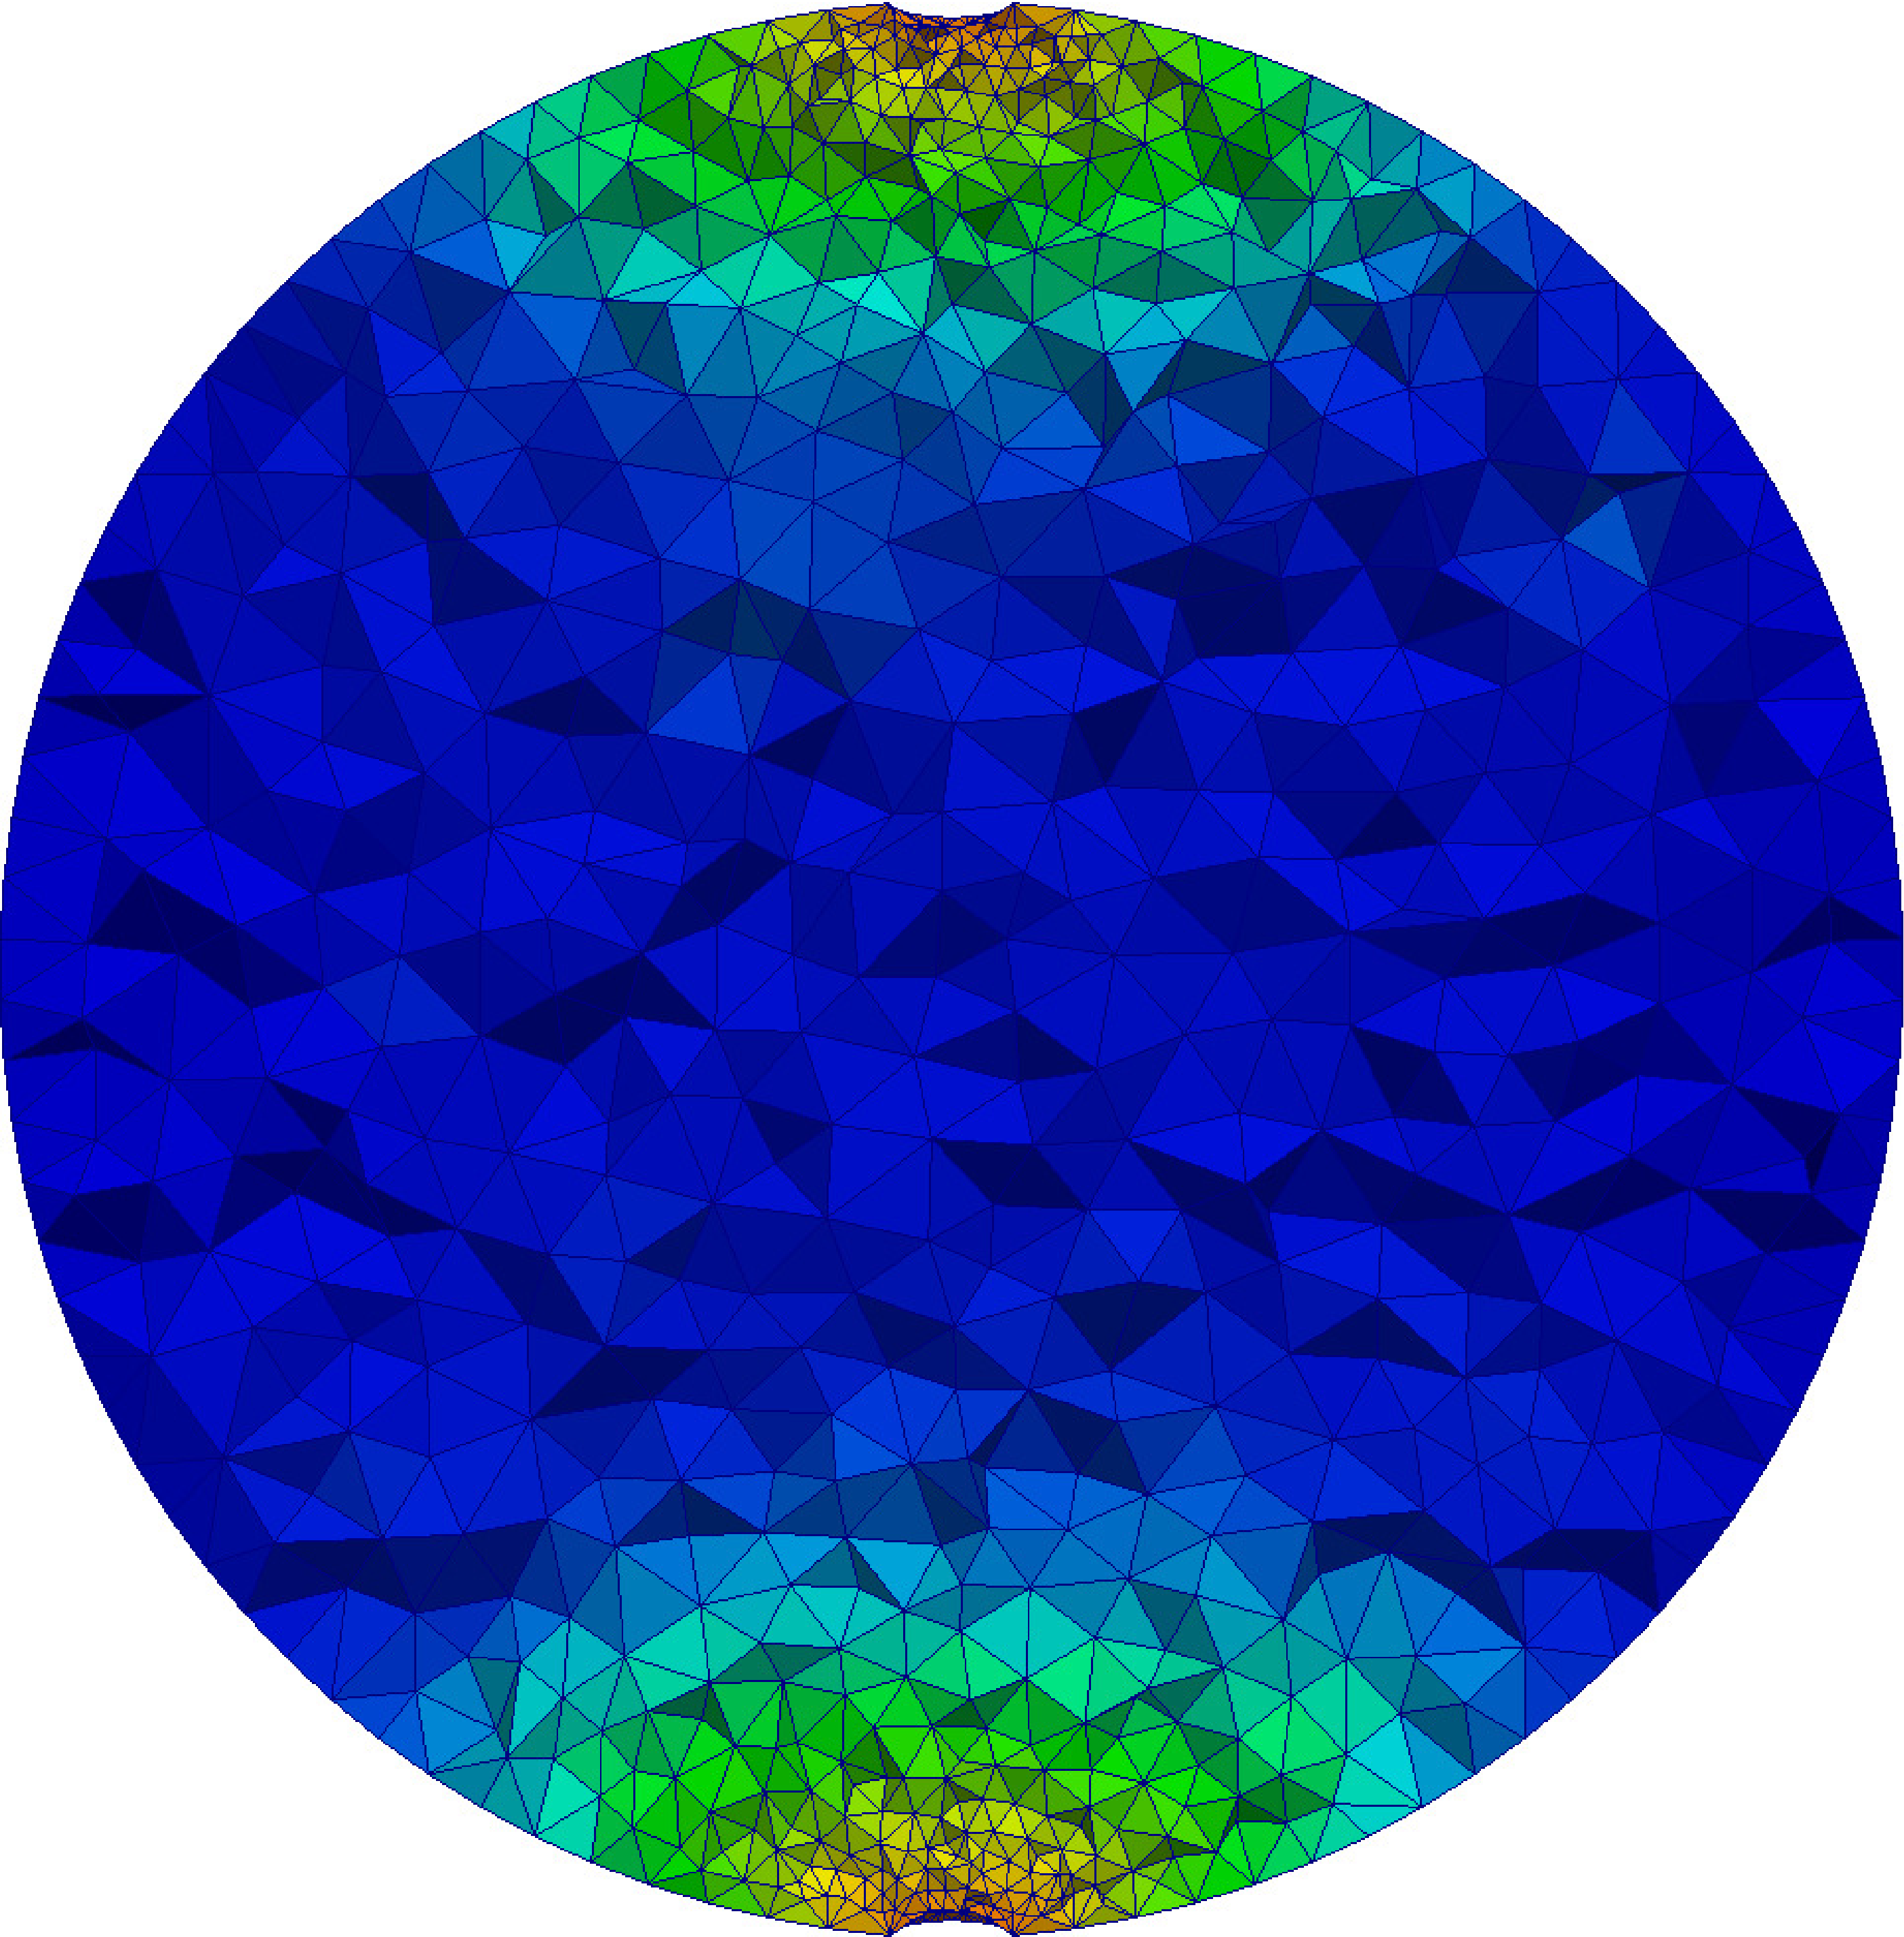 Sphere cdfm0-eps-converted-to.png